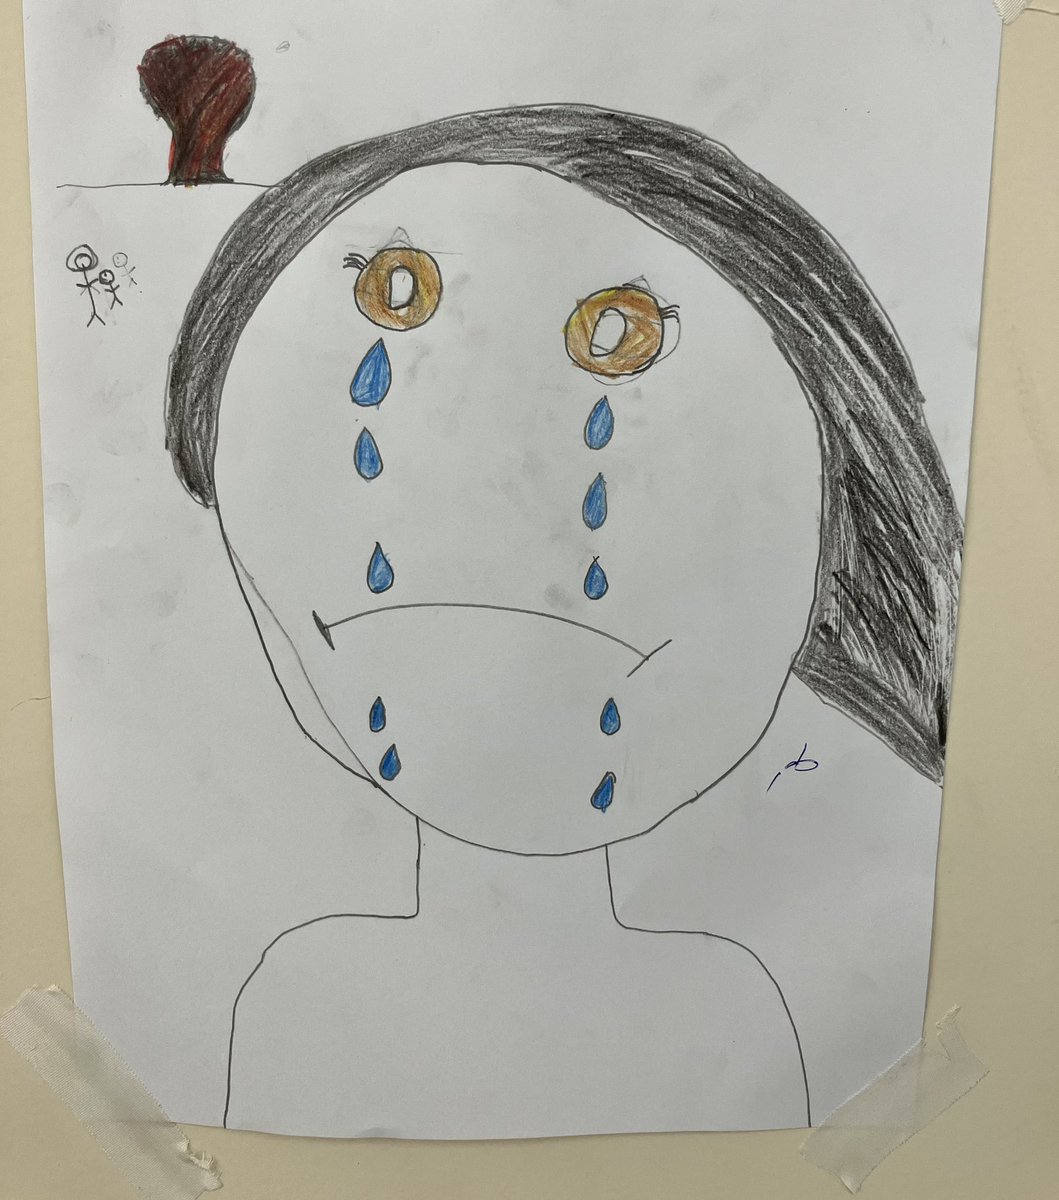 A child’s picture from the @MSF Mental Health room in the Al-Shaboura clinic, #Rafah #Gaza. People “joke” that *Post* Traumatic Stress disorder (PTSD), doesn’t apply in Gaza as - like the physical wounds - the mental wounds keep coming.